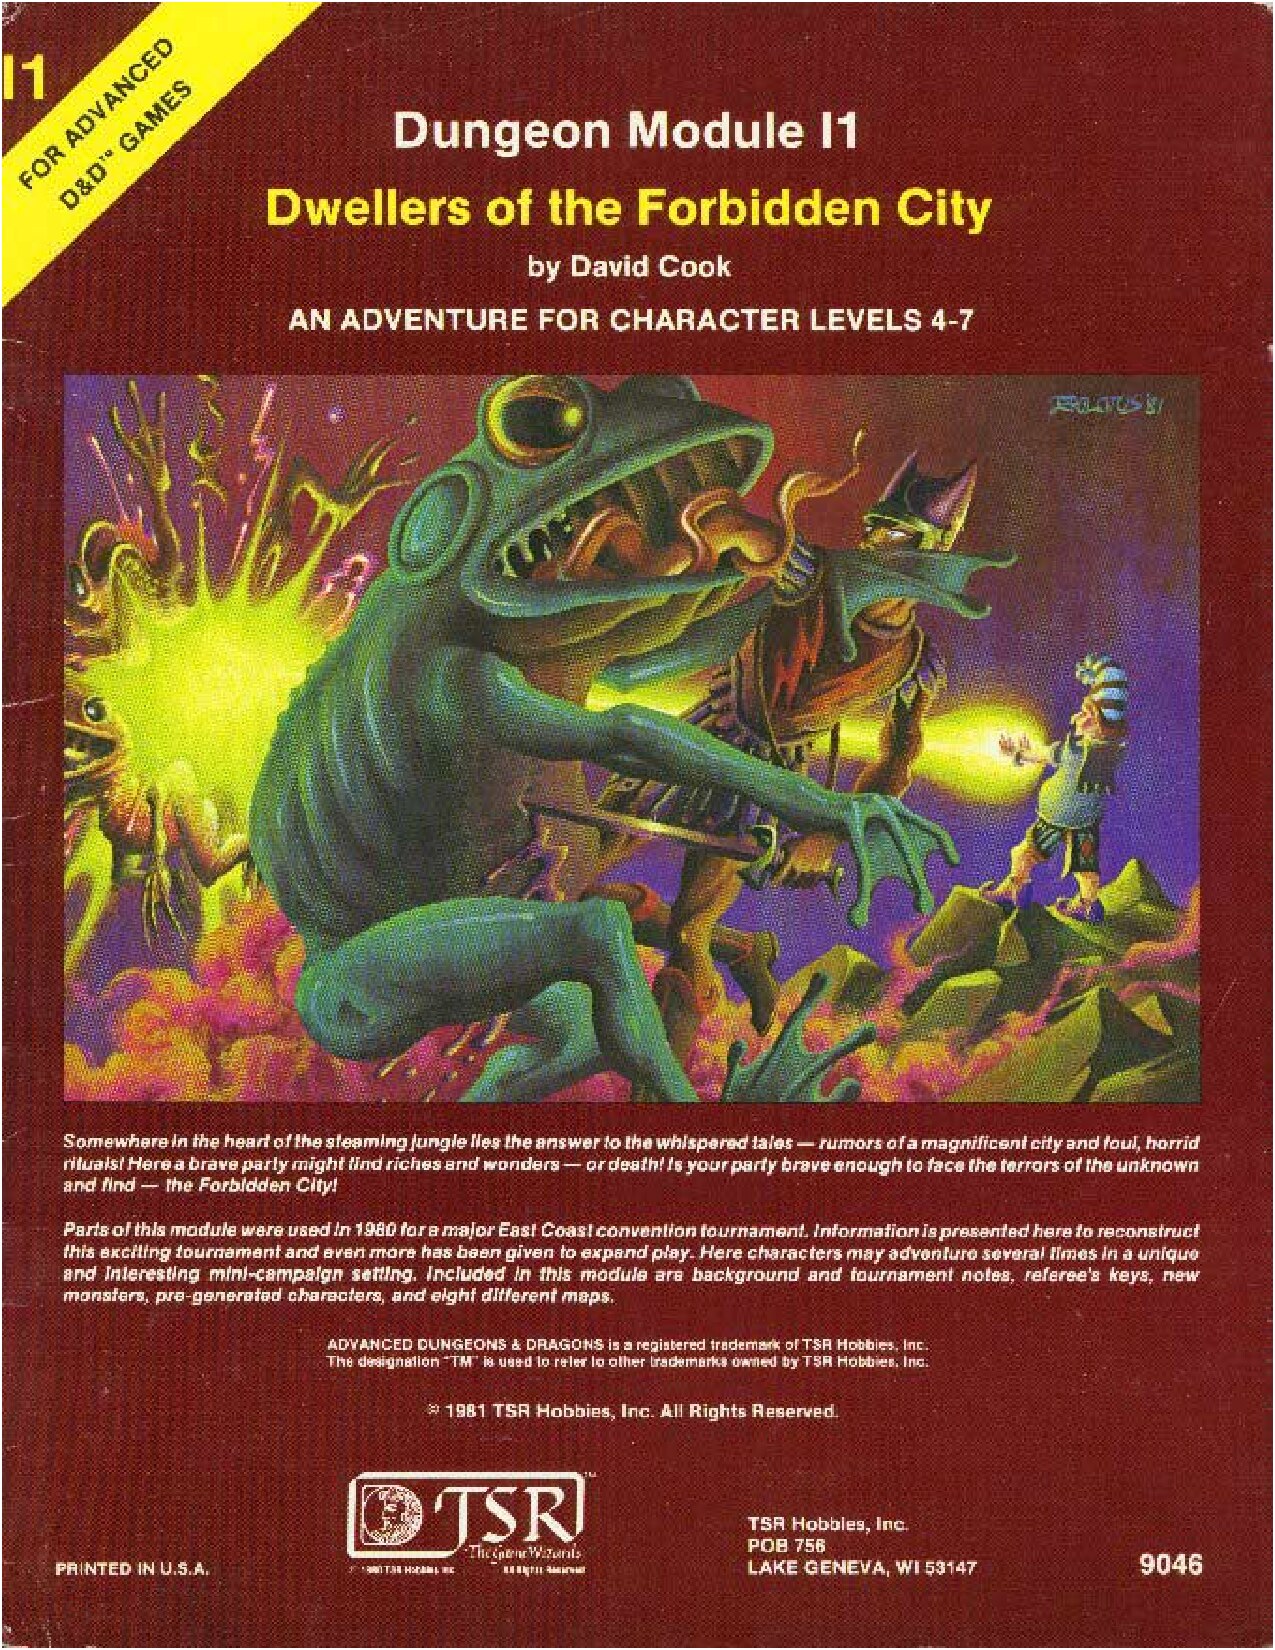 I1 - Dwellers of the Forbidden City